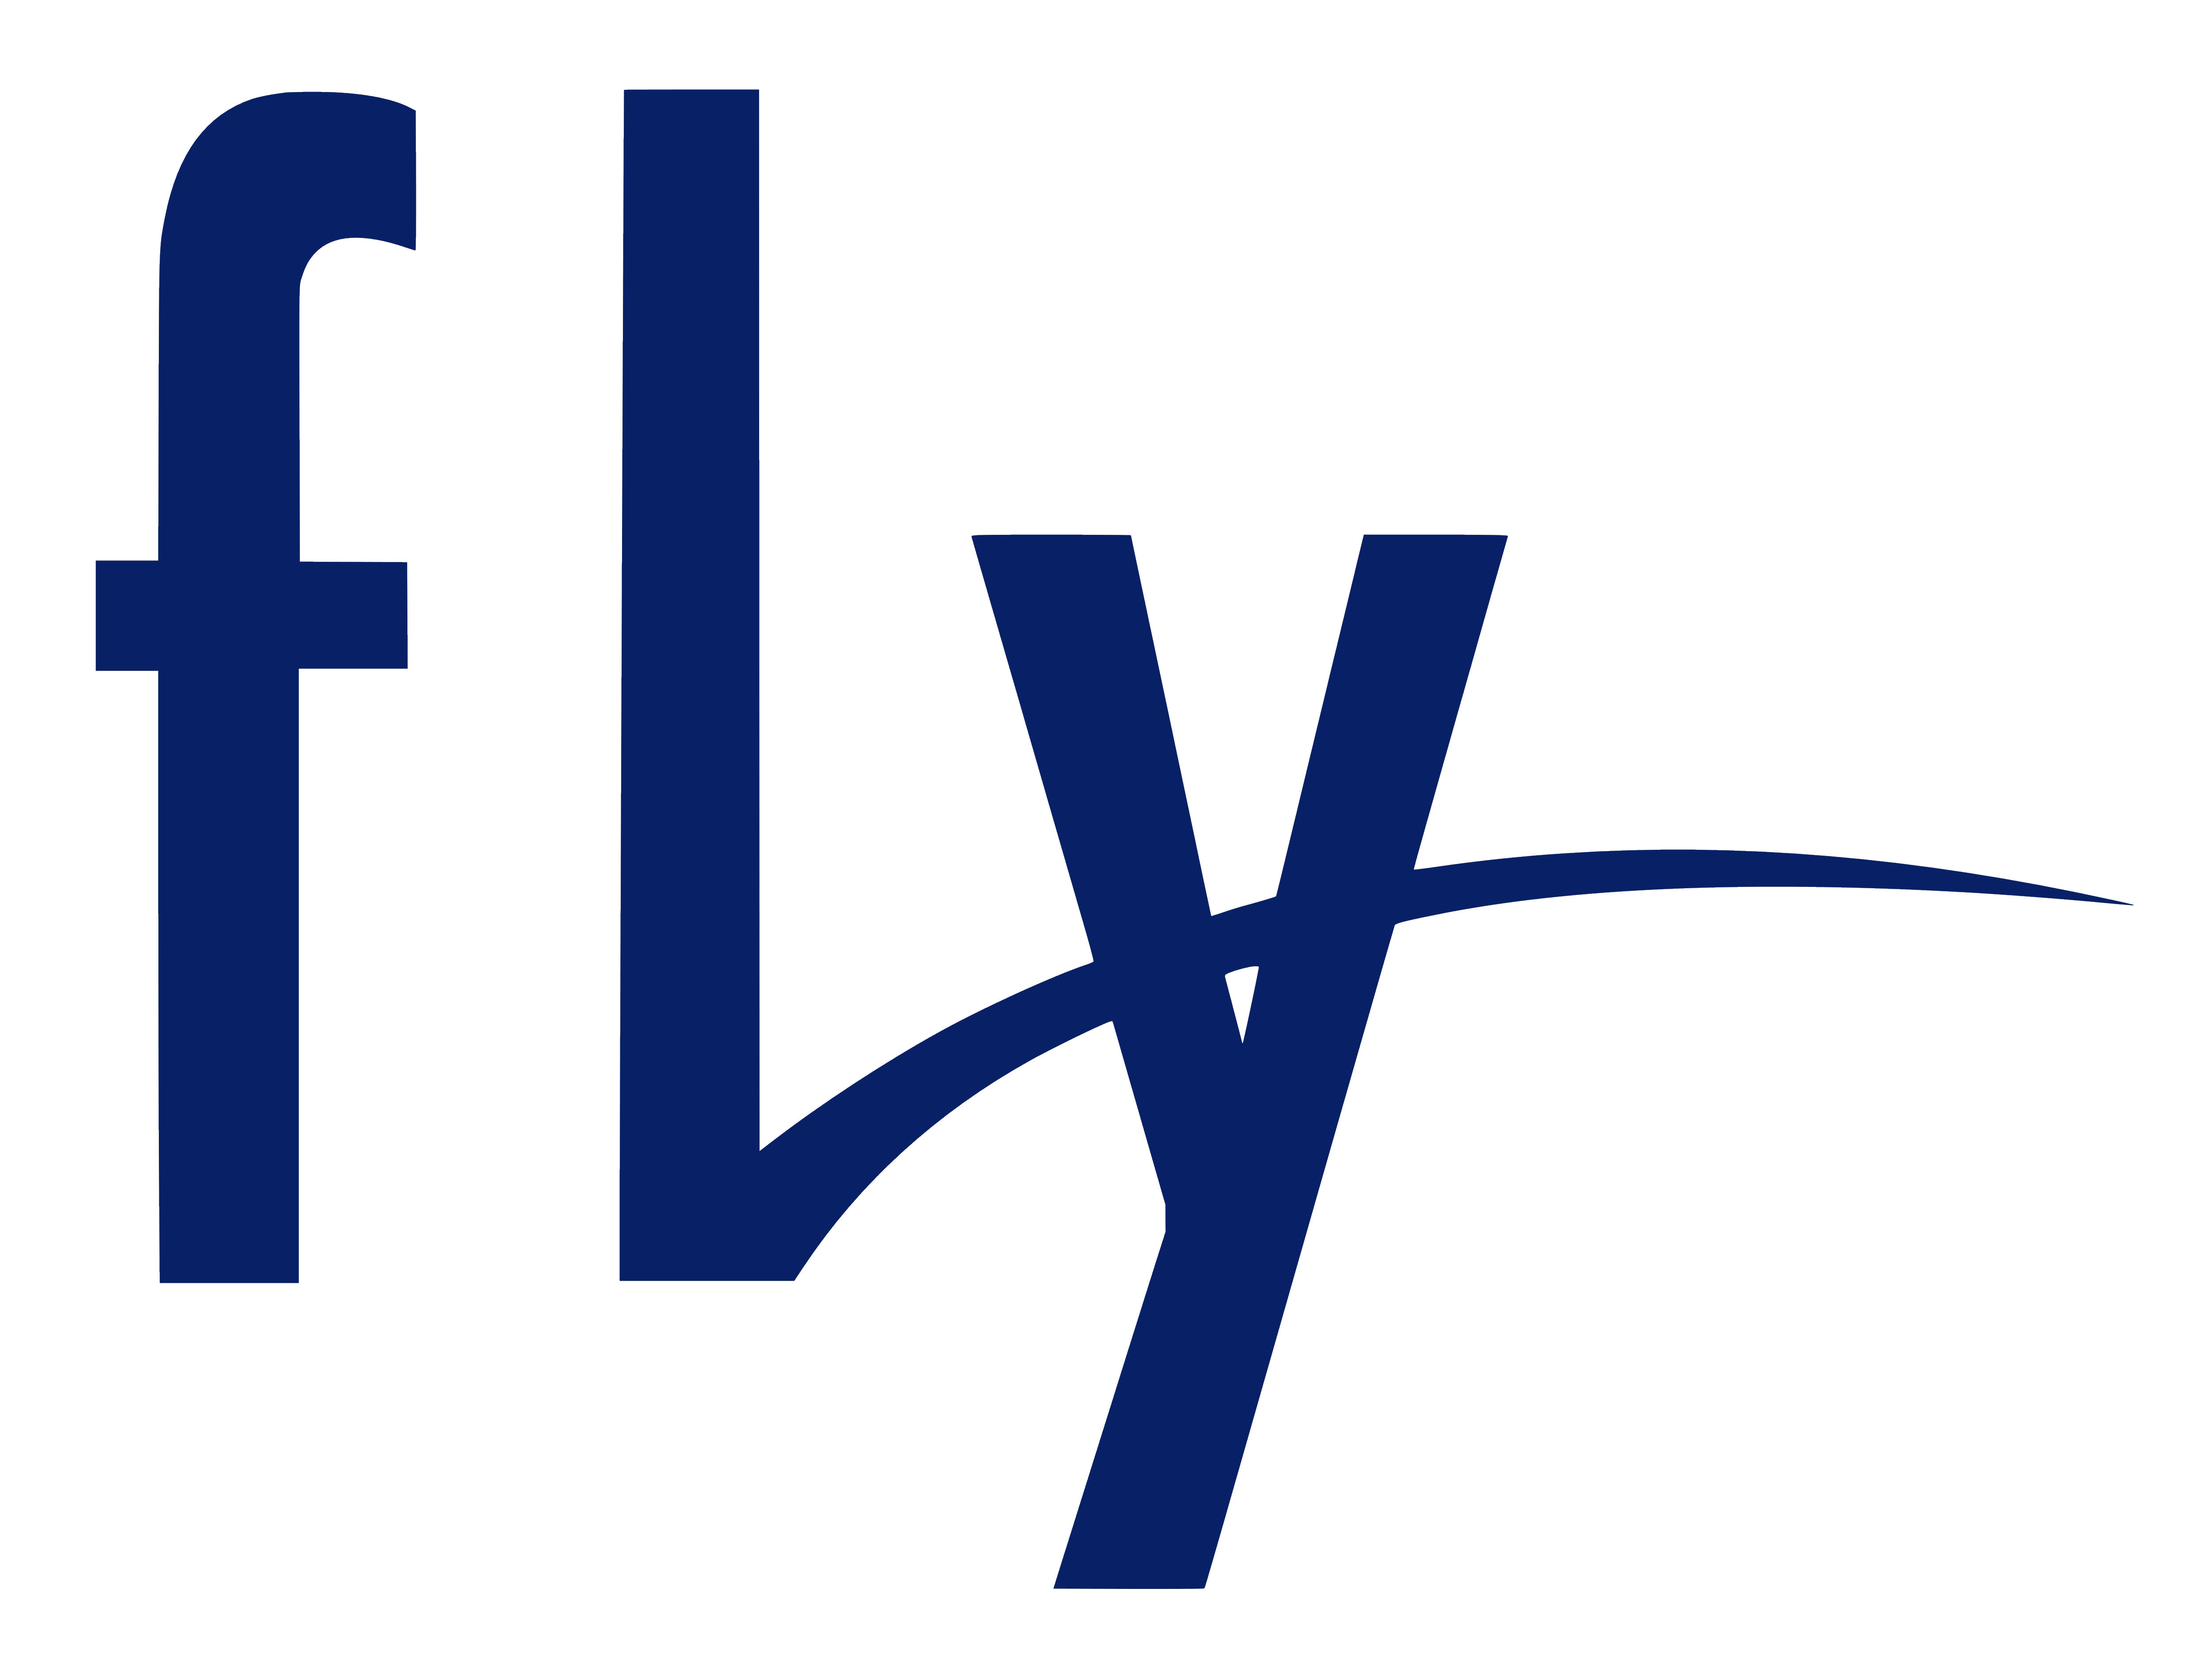 Fly - Logos Download